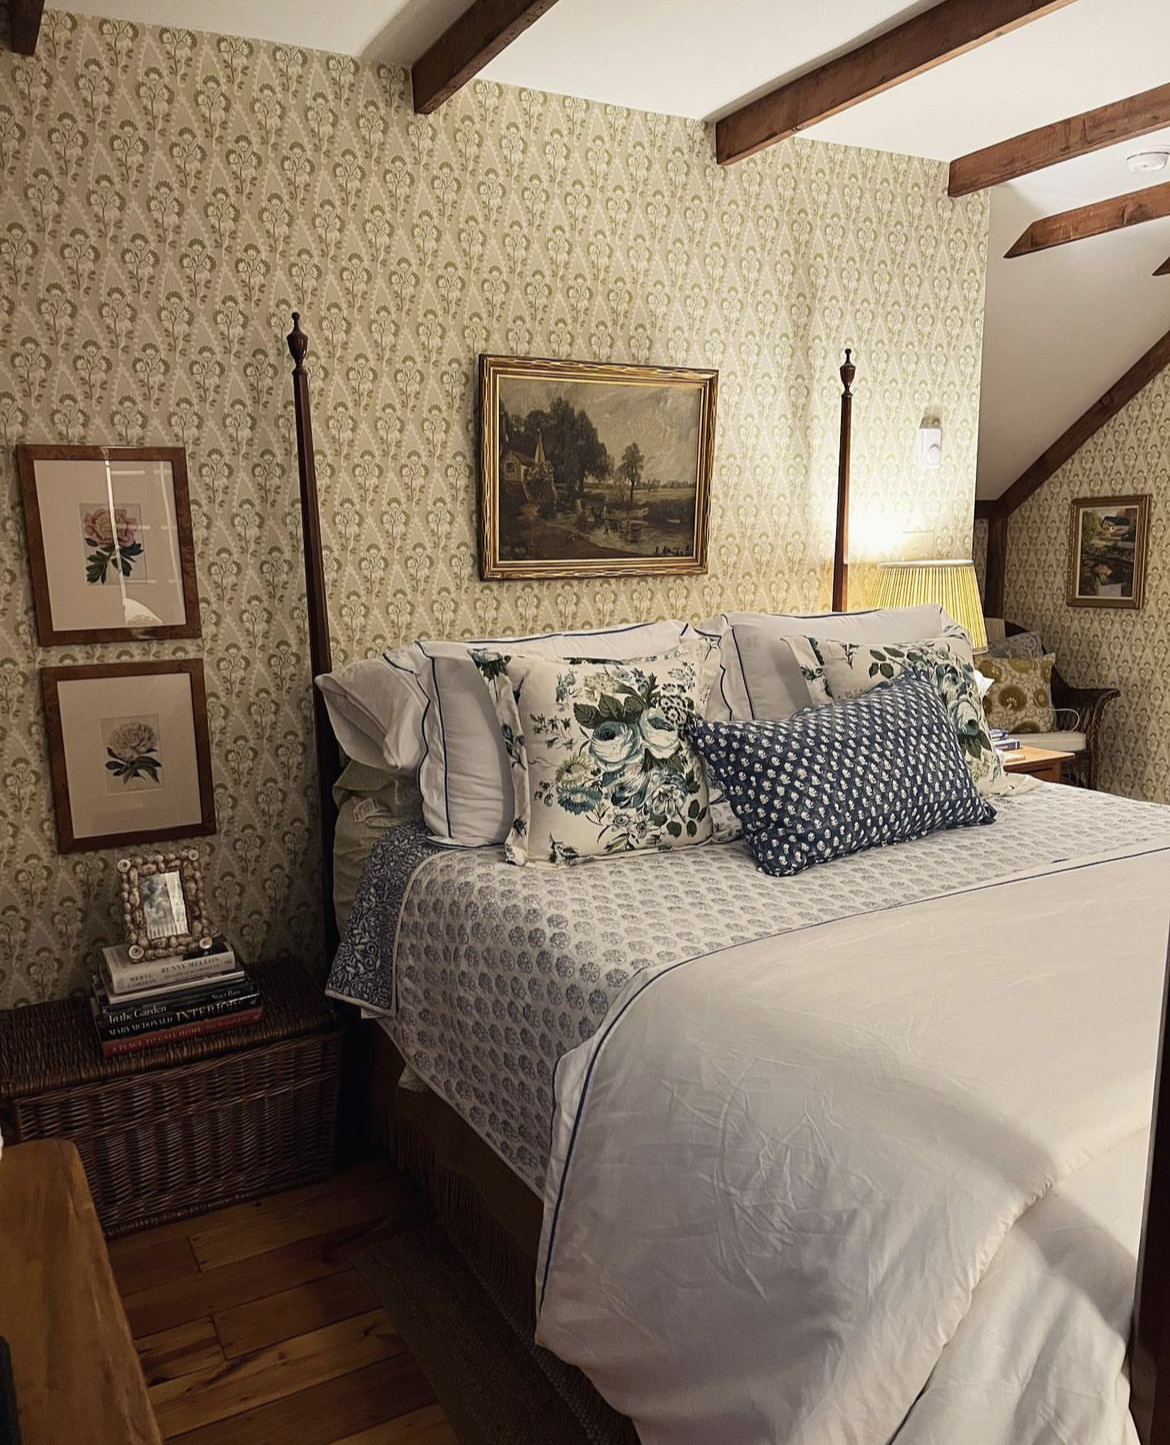 Four poster bed layered with a variety of pillows and vintage bed linens in a room with several works of art and a chest standing as a night stand.